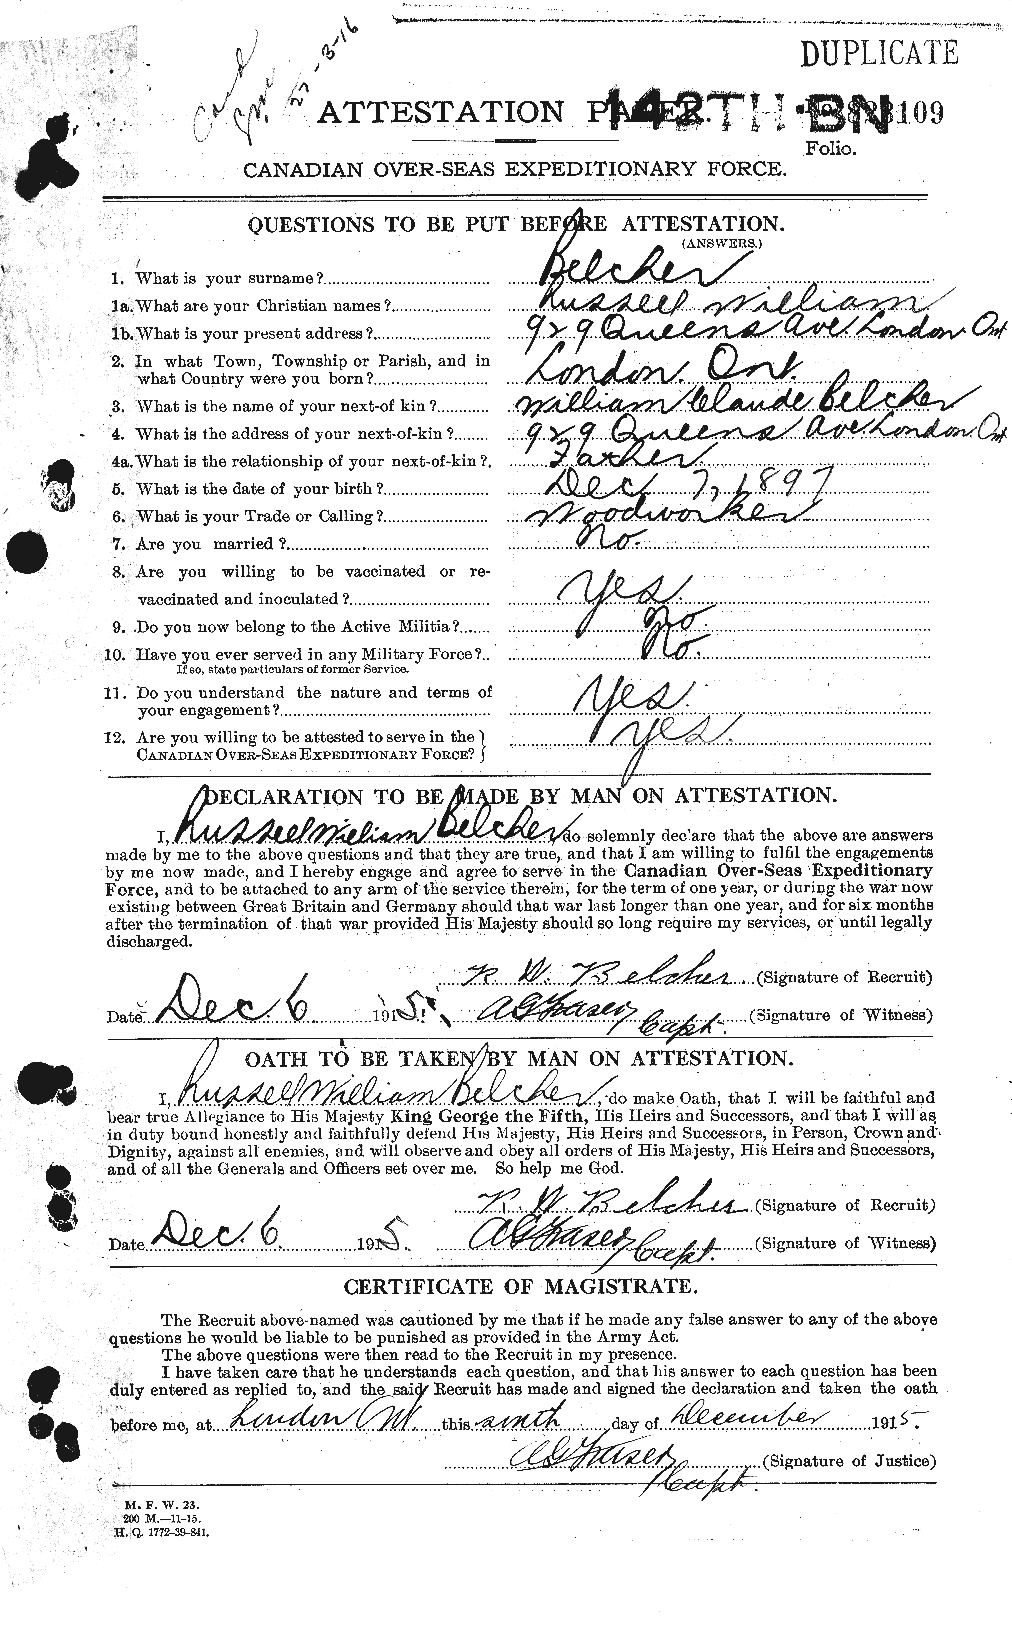 Personnel Records of the First World War - CEF 232545a